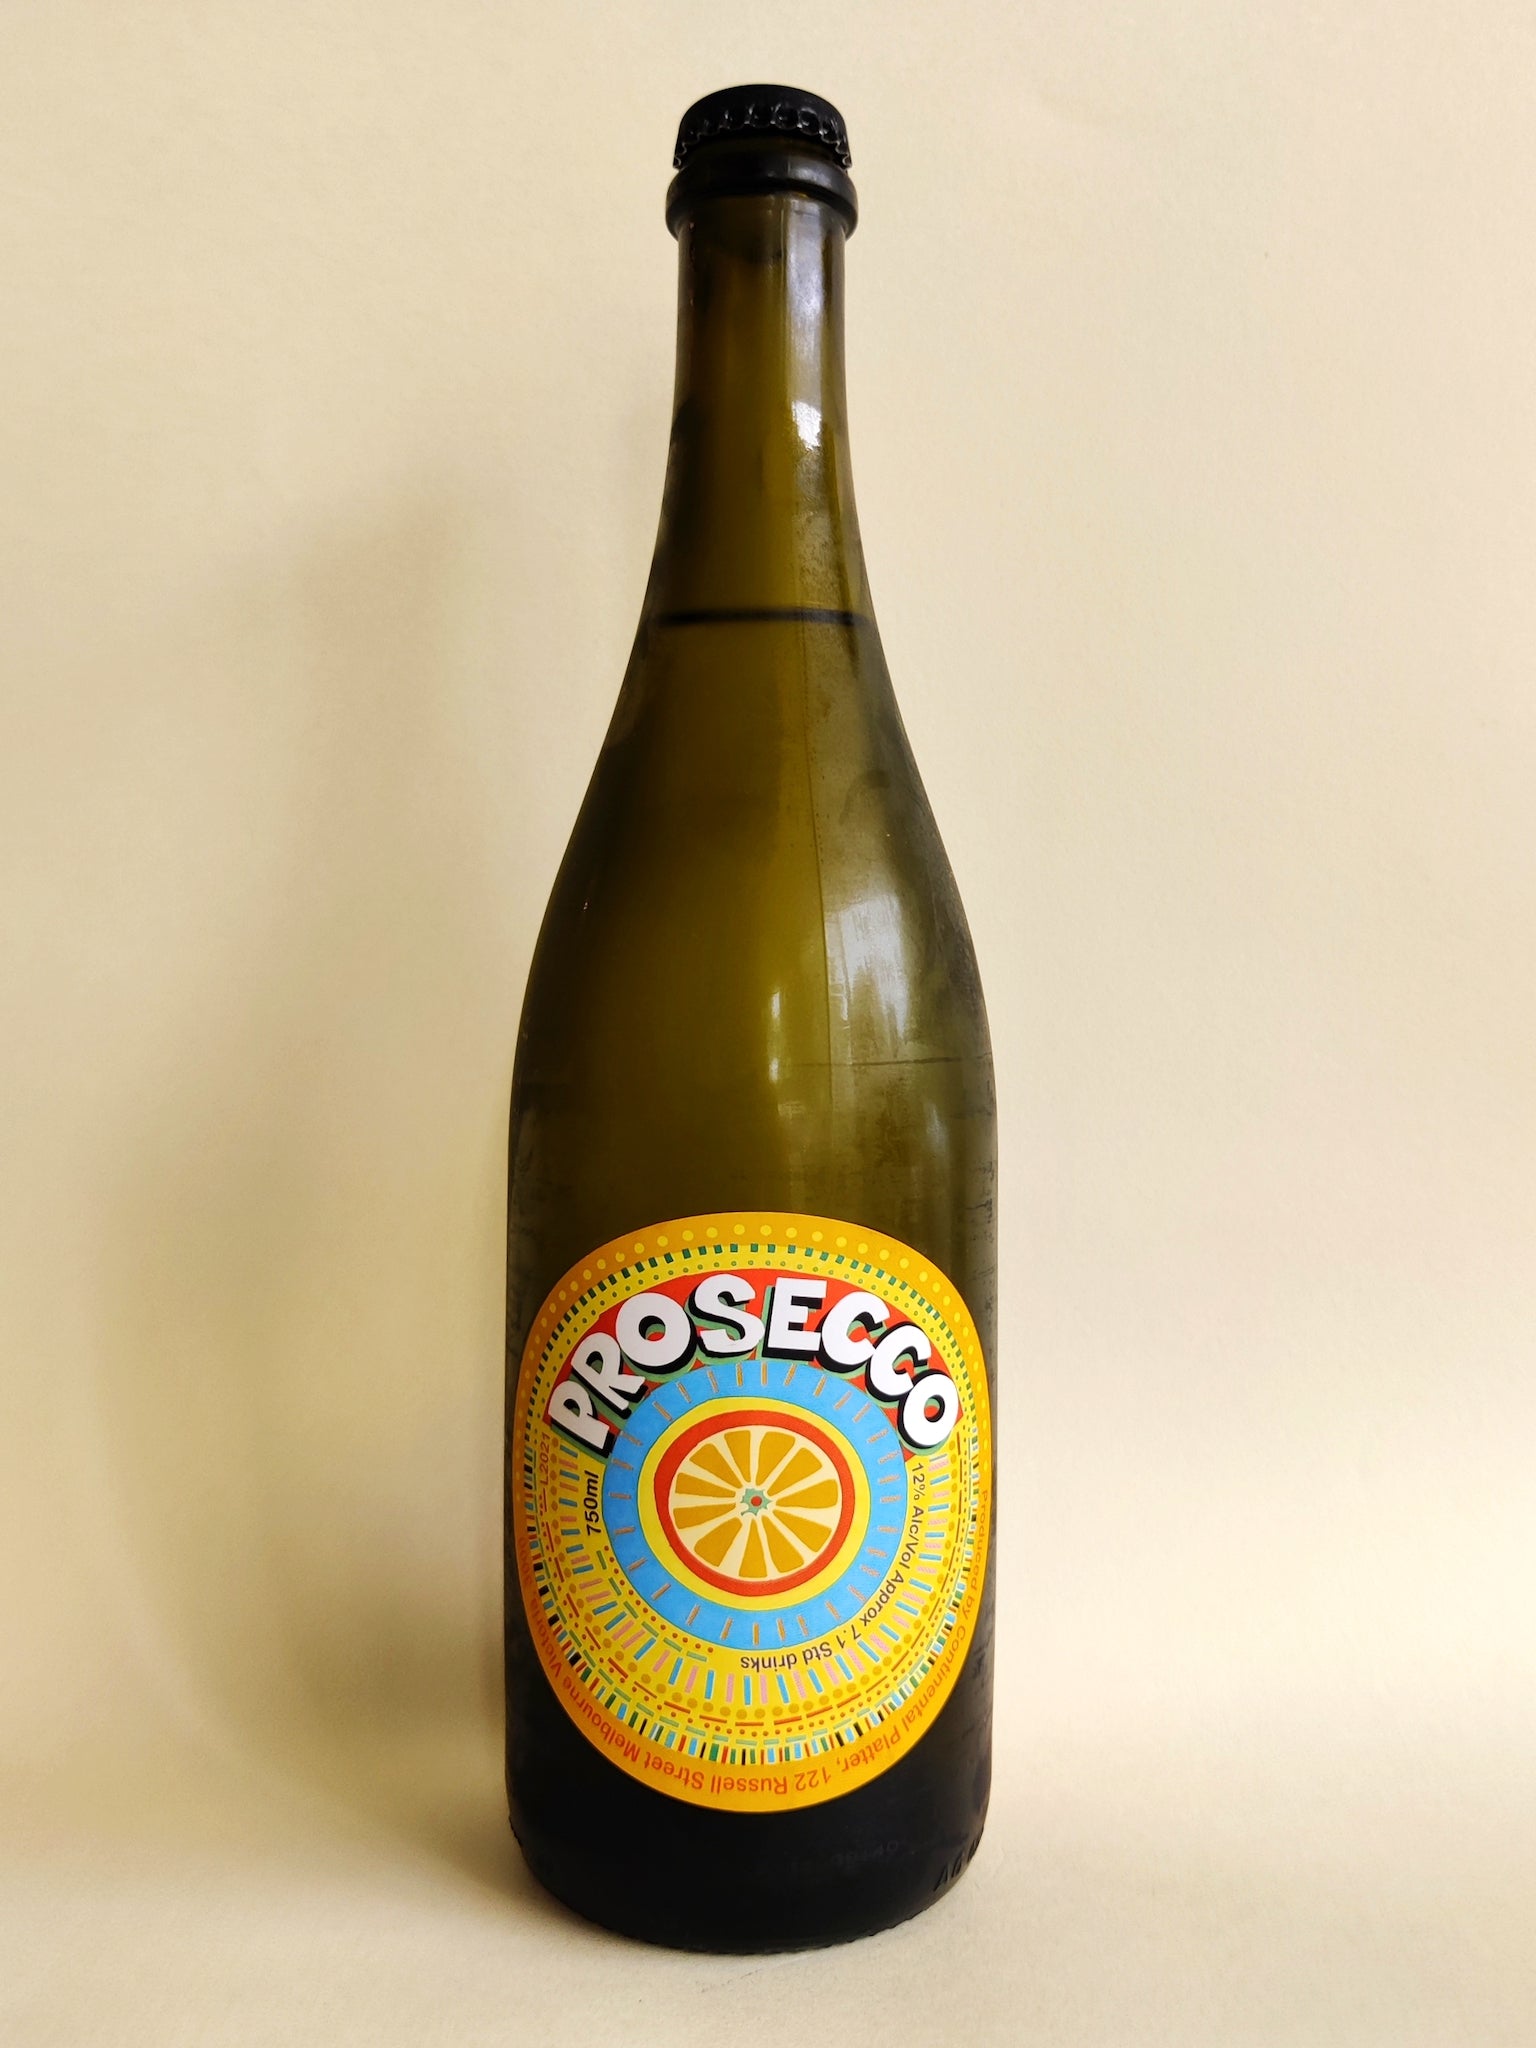 A bottle of Continental Platter Prosecco from the King Valley, Victoria.